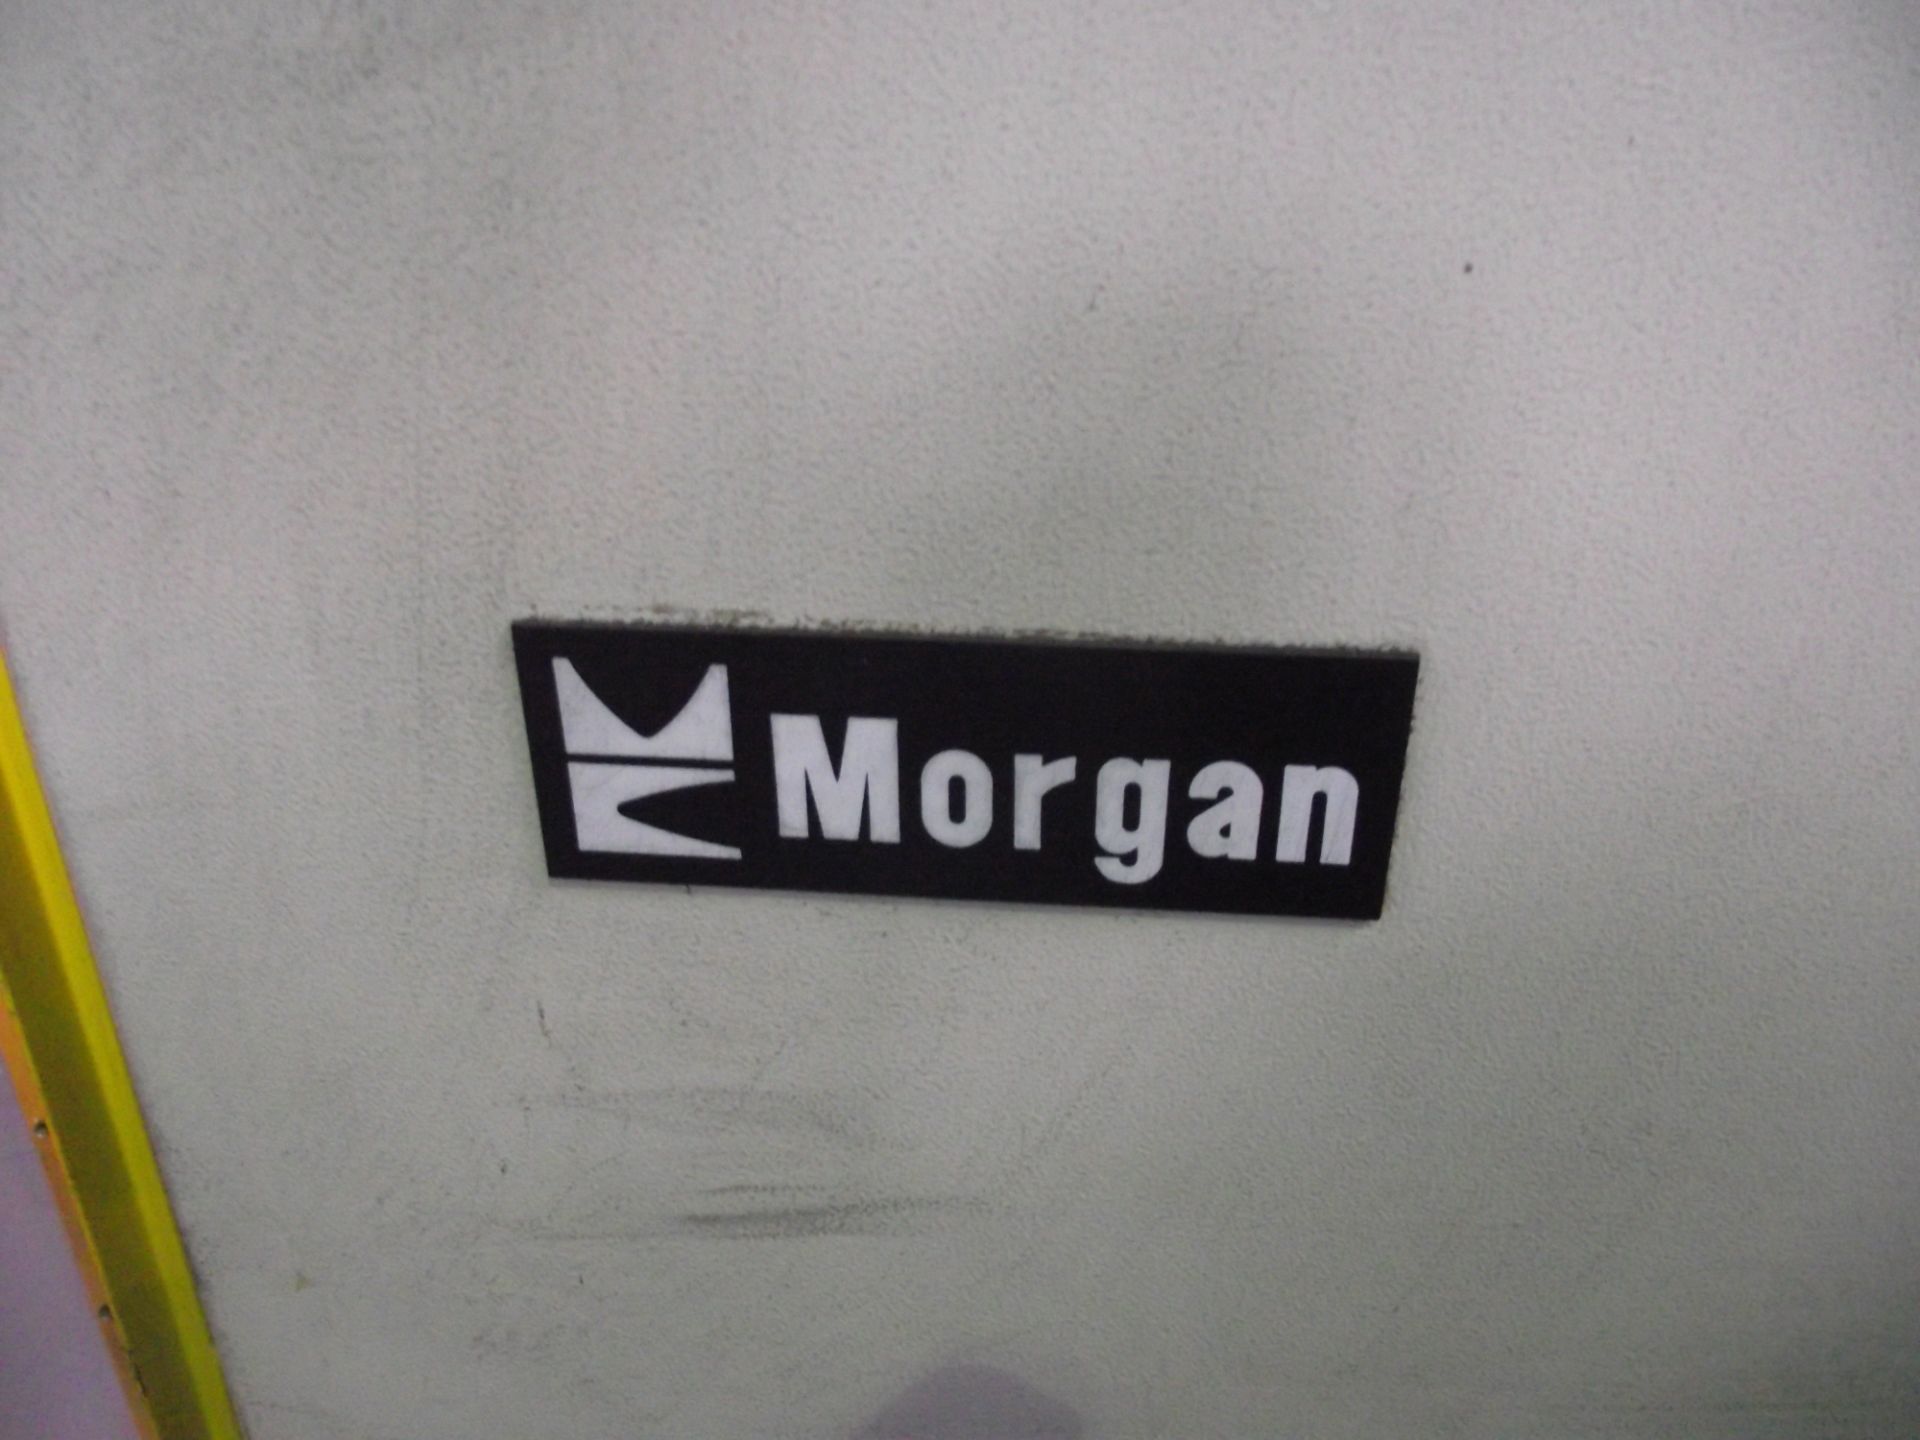 MORGAN 72KW ERBO (ELECTRICAL RESISTANCE BALE-OUT) FURNACE - Image 6 of 11